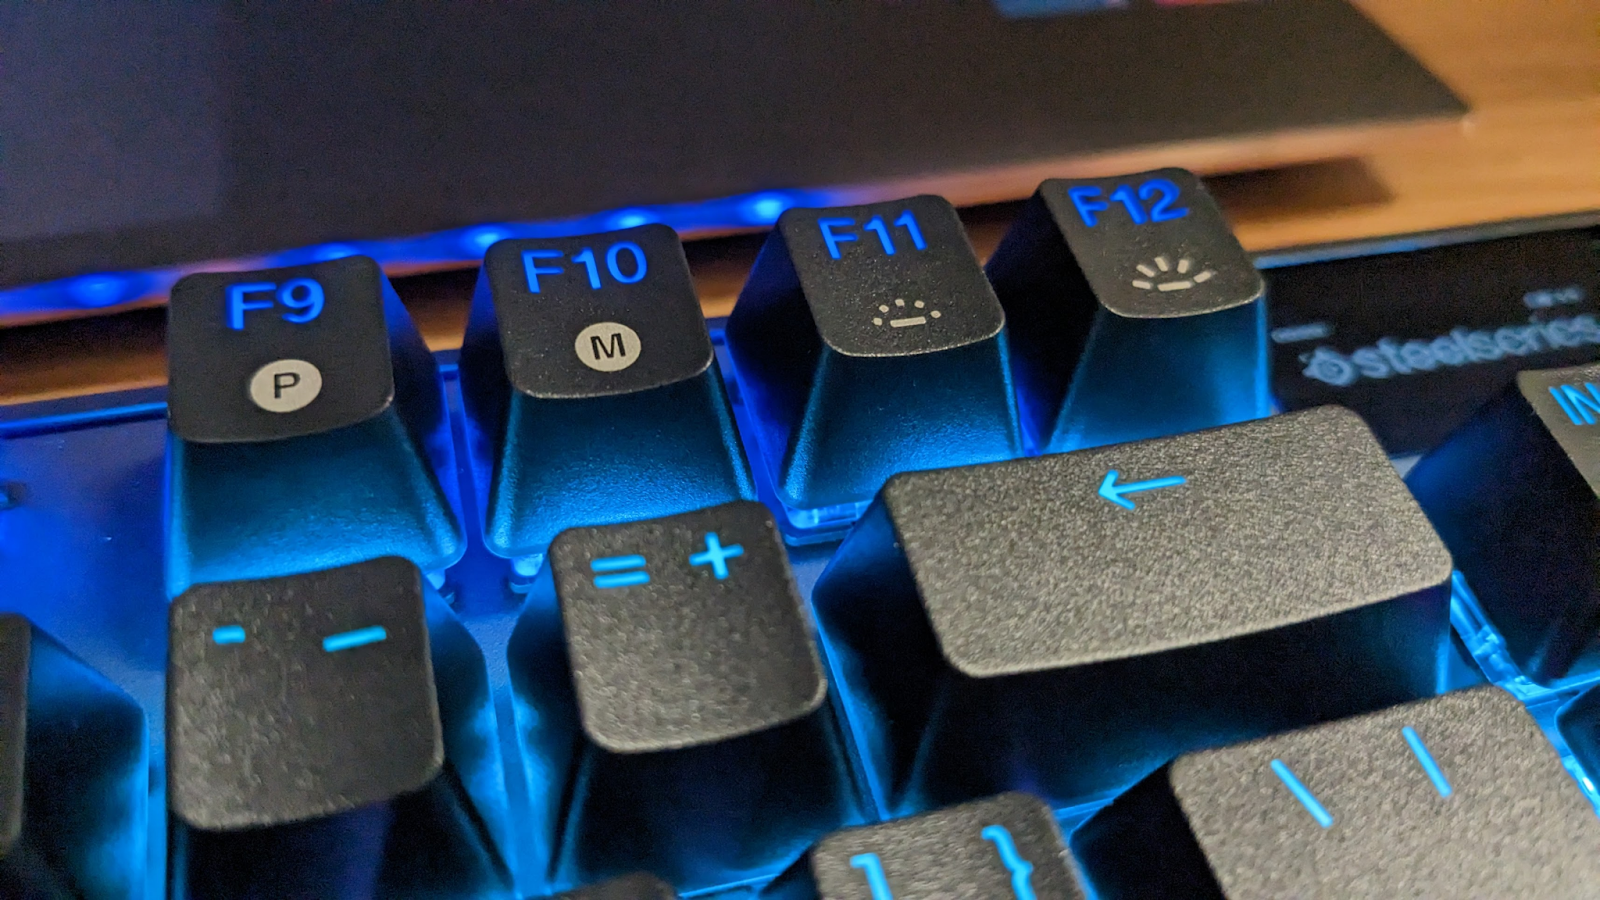 https://www.androidguys.com/wp-content/uploads/2023/03/steelseries_apexpro_tkl_06.png